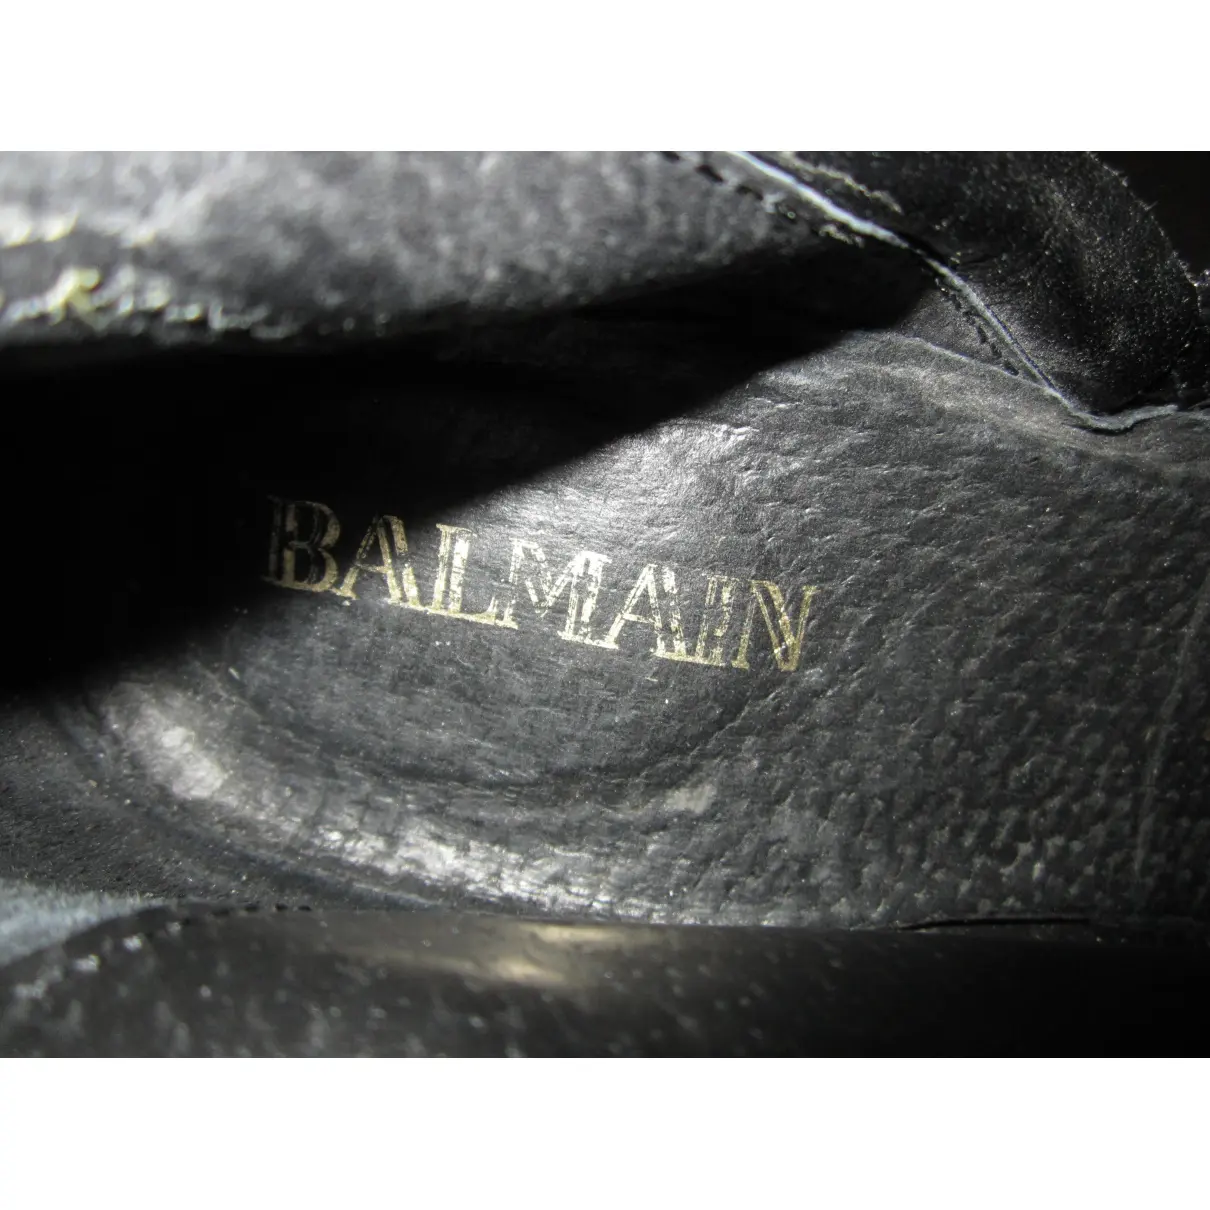 Leather lace up boots Balmain